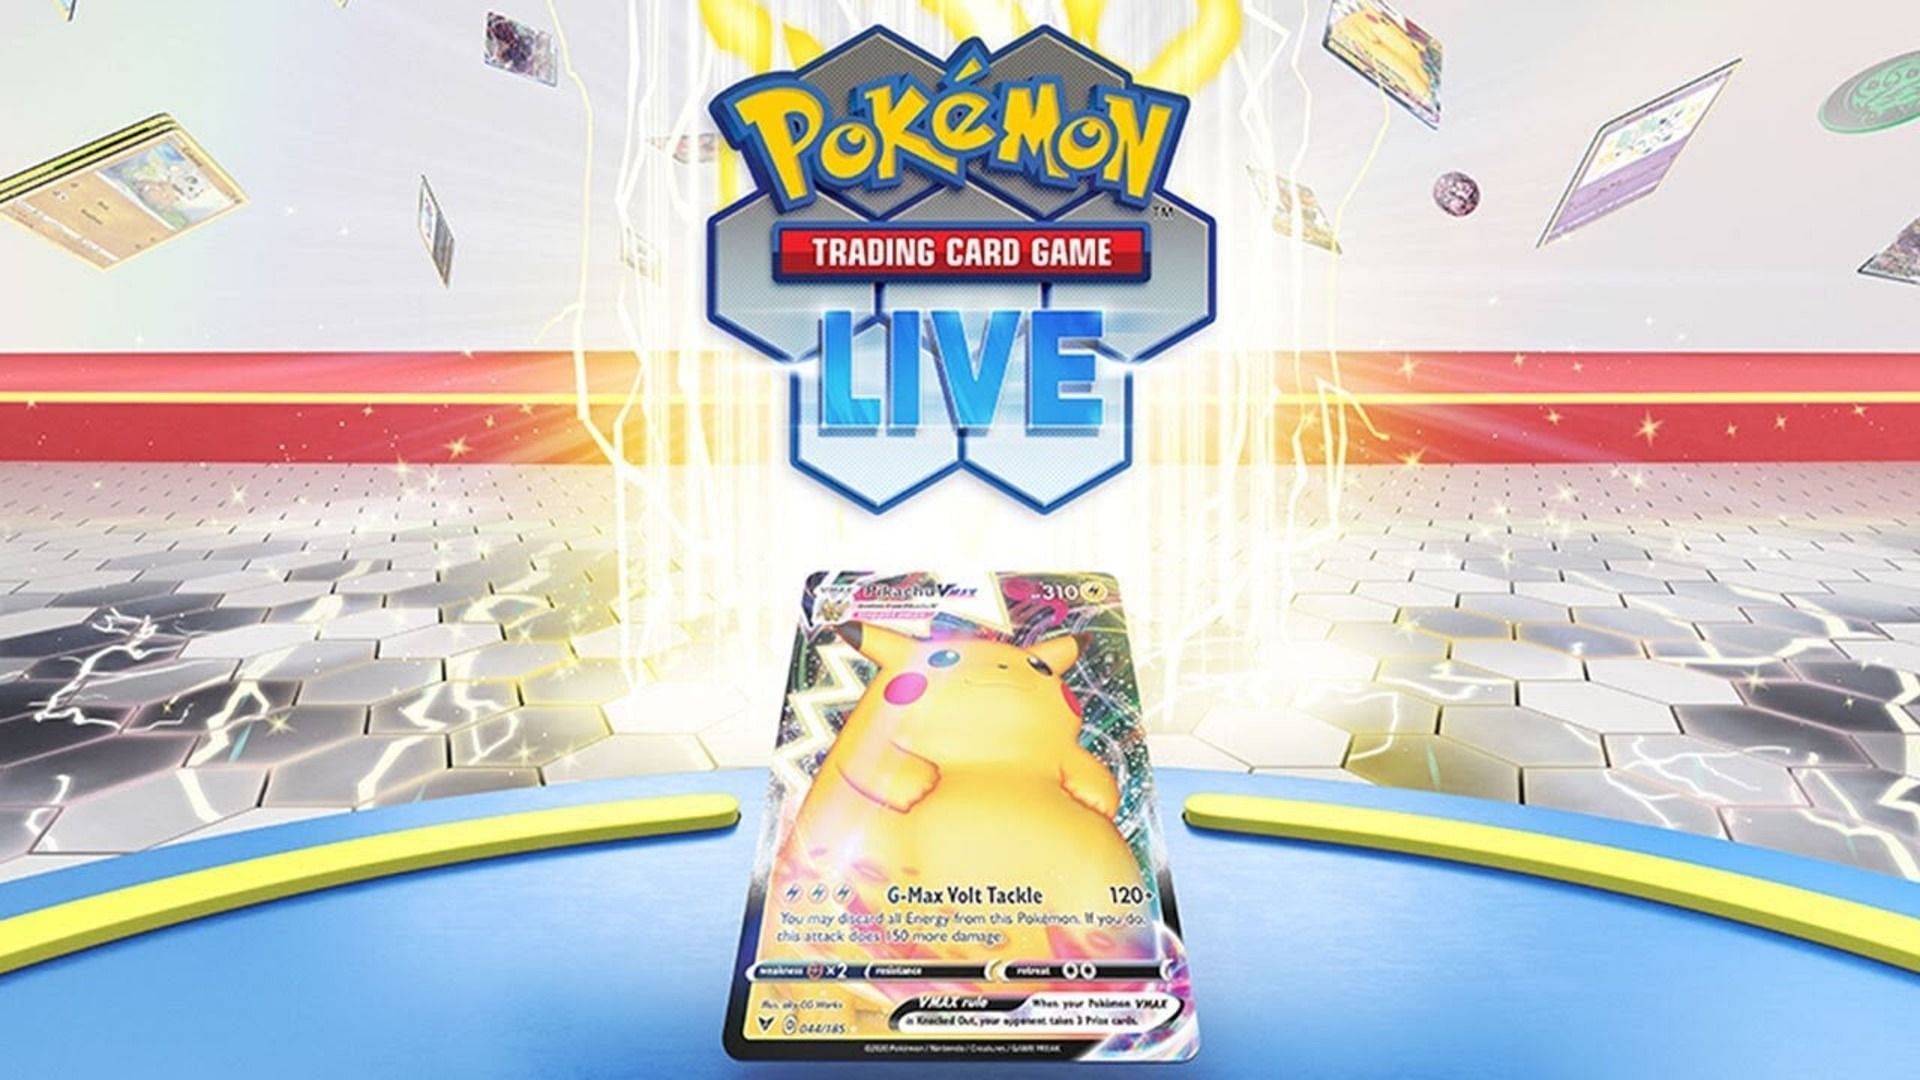 The official thumbnail for the global release for Pokemon Trading Card Game Live (Image via The Pokemon Company)